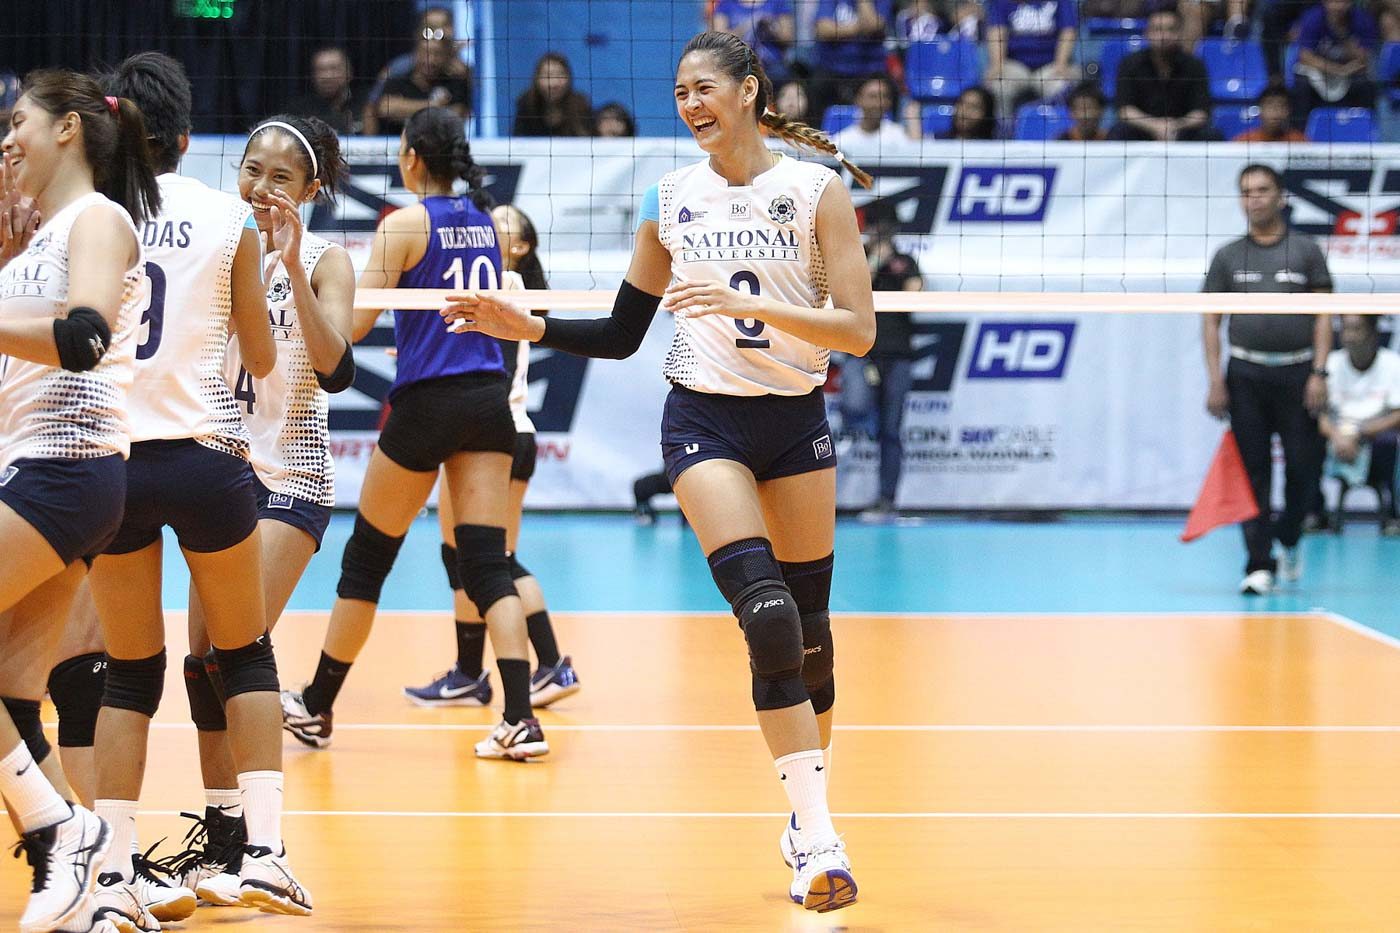 NU Lady Bulldogs start second round with sweep of Adamson Lady Falcons